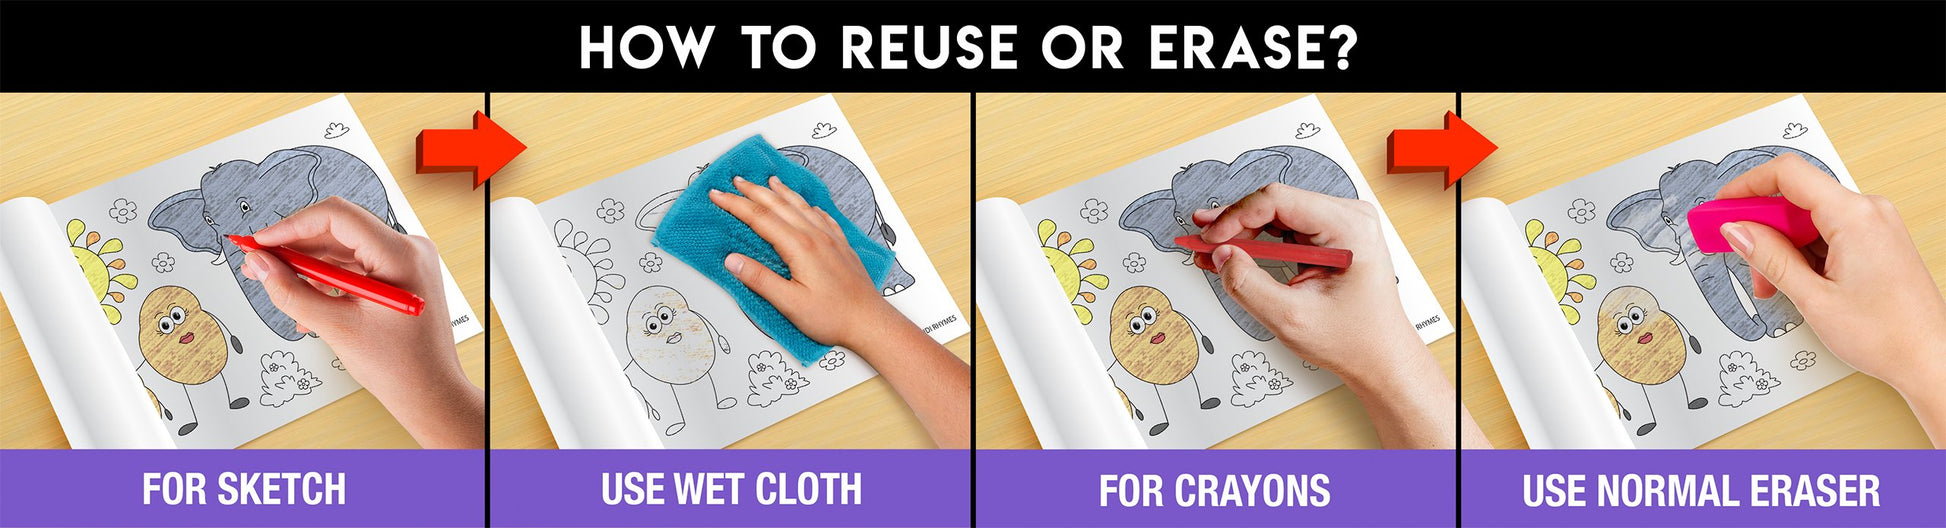 The image has a lavenderbackground with four pictures demonstrating how to reuse or erase: the first picture depicts sketching on the sheet, the second shows using a wet cloth to remove sketches, the third image displays crayons colouring on the sheet, and the fourth image illustrates erasing crayons with a regular eraser.